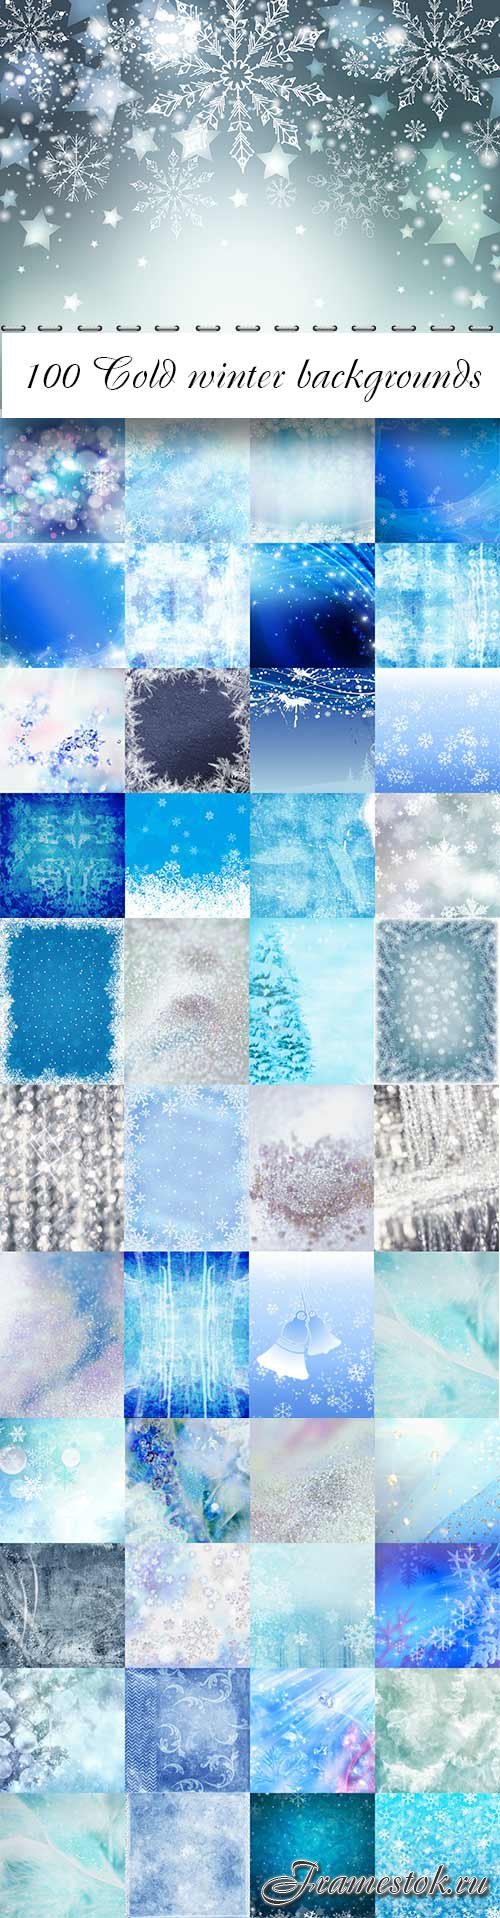 100 Cold winter backgrounds